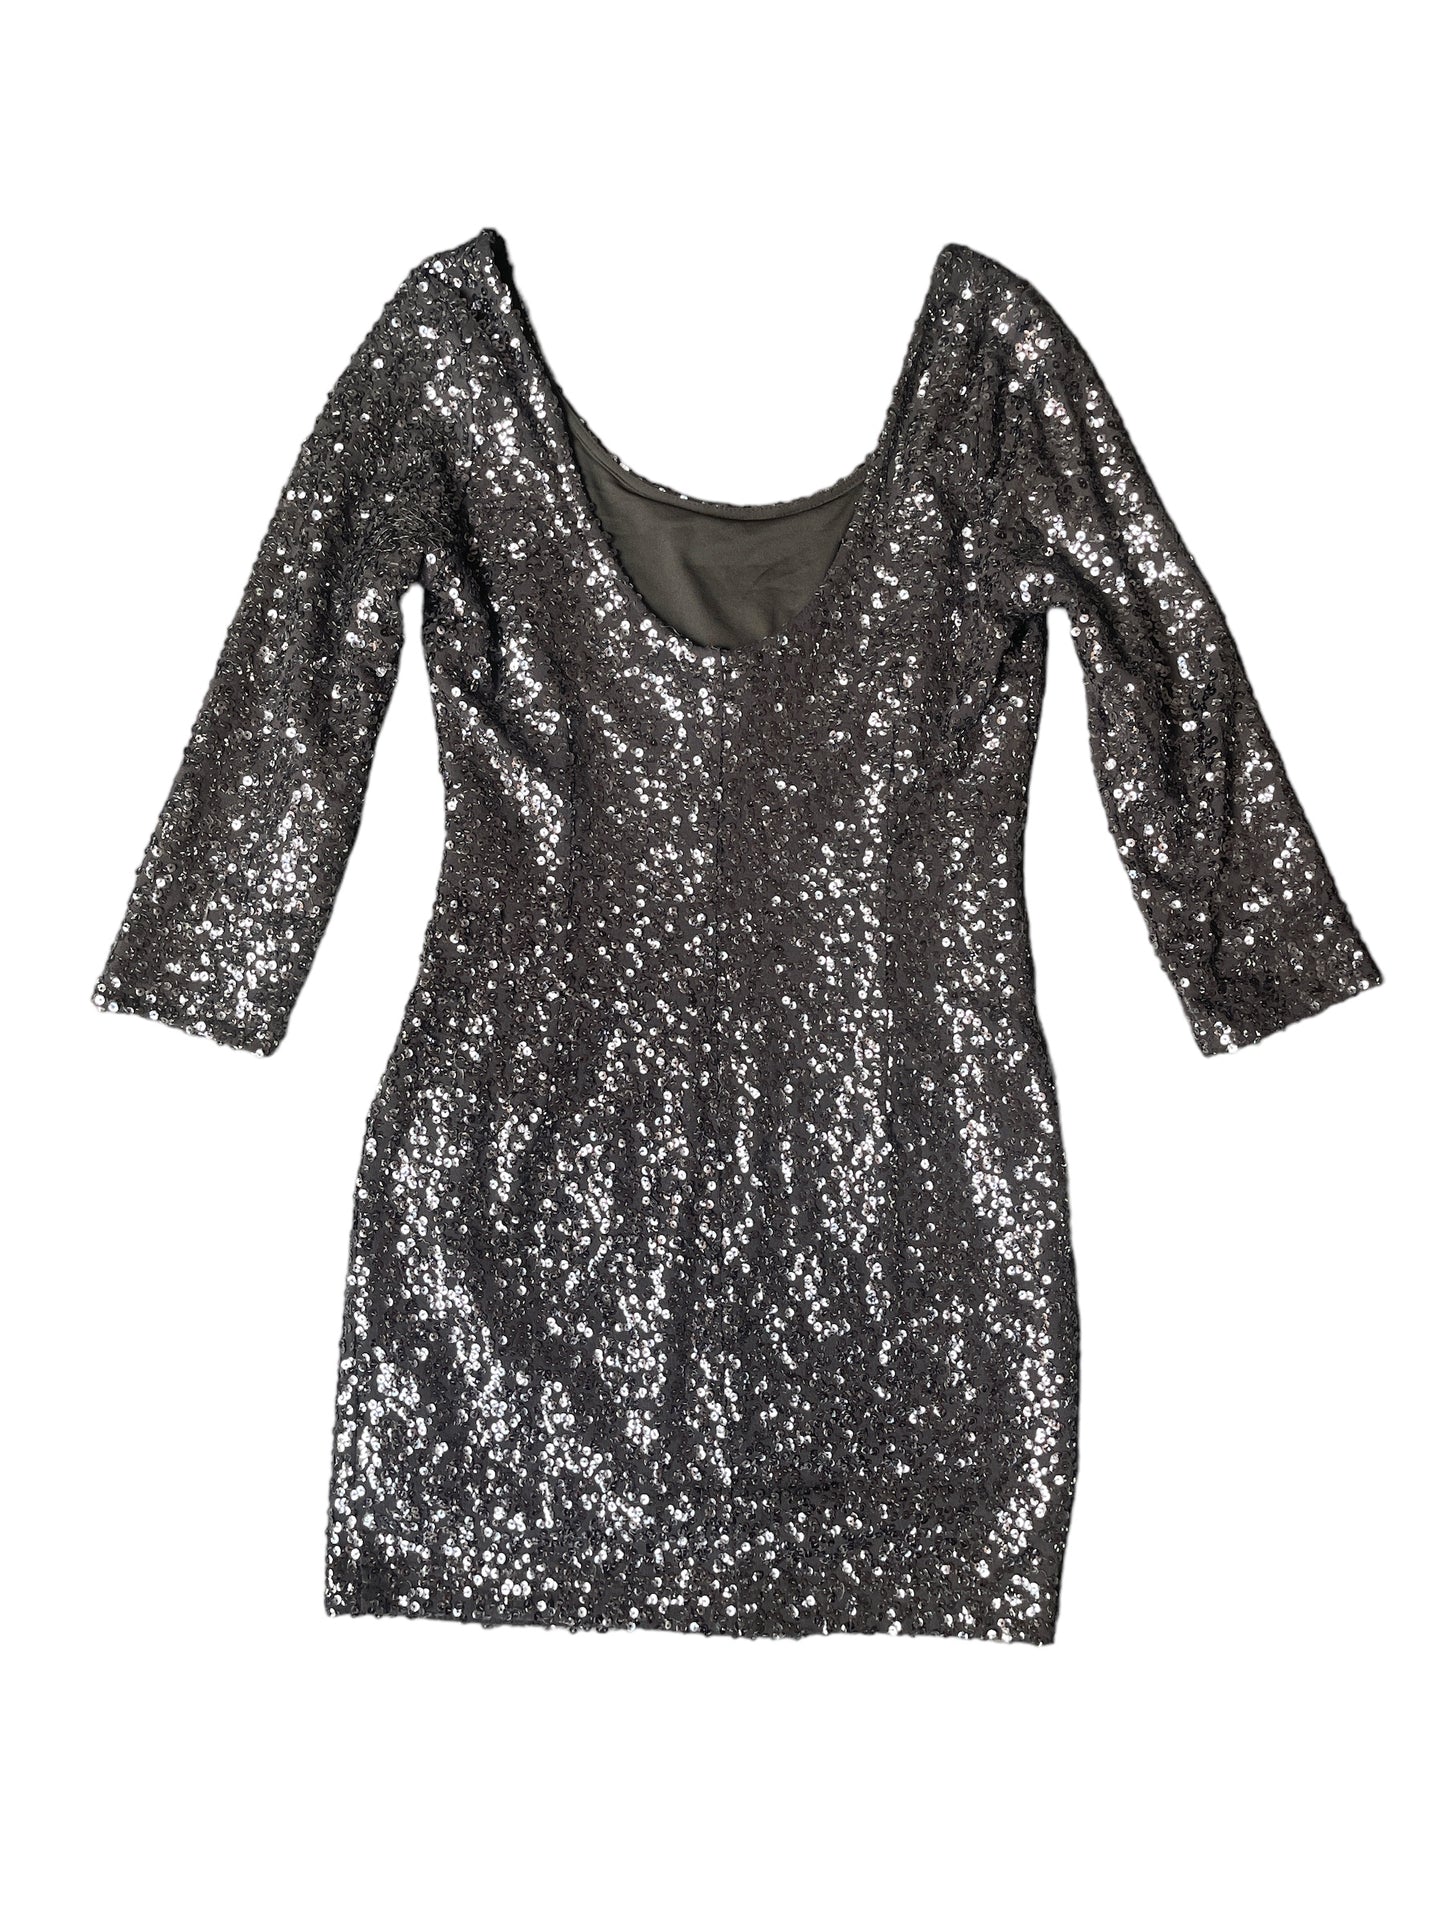 Potter's Pot Special Occasion Silver Sequin Dress Size M